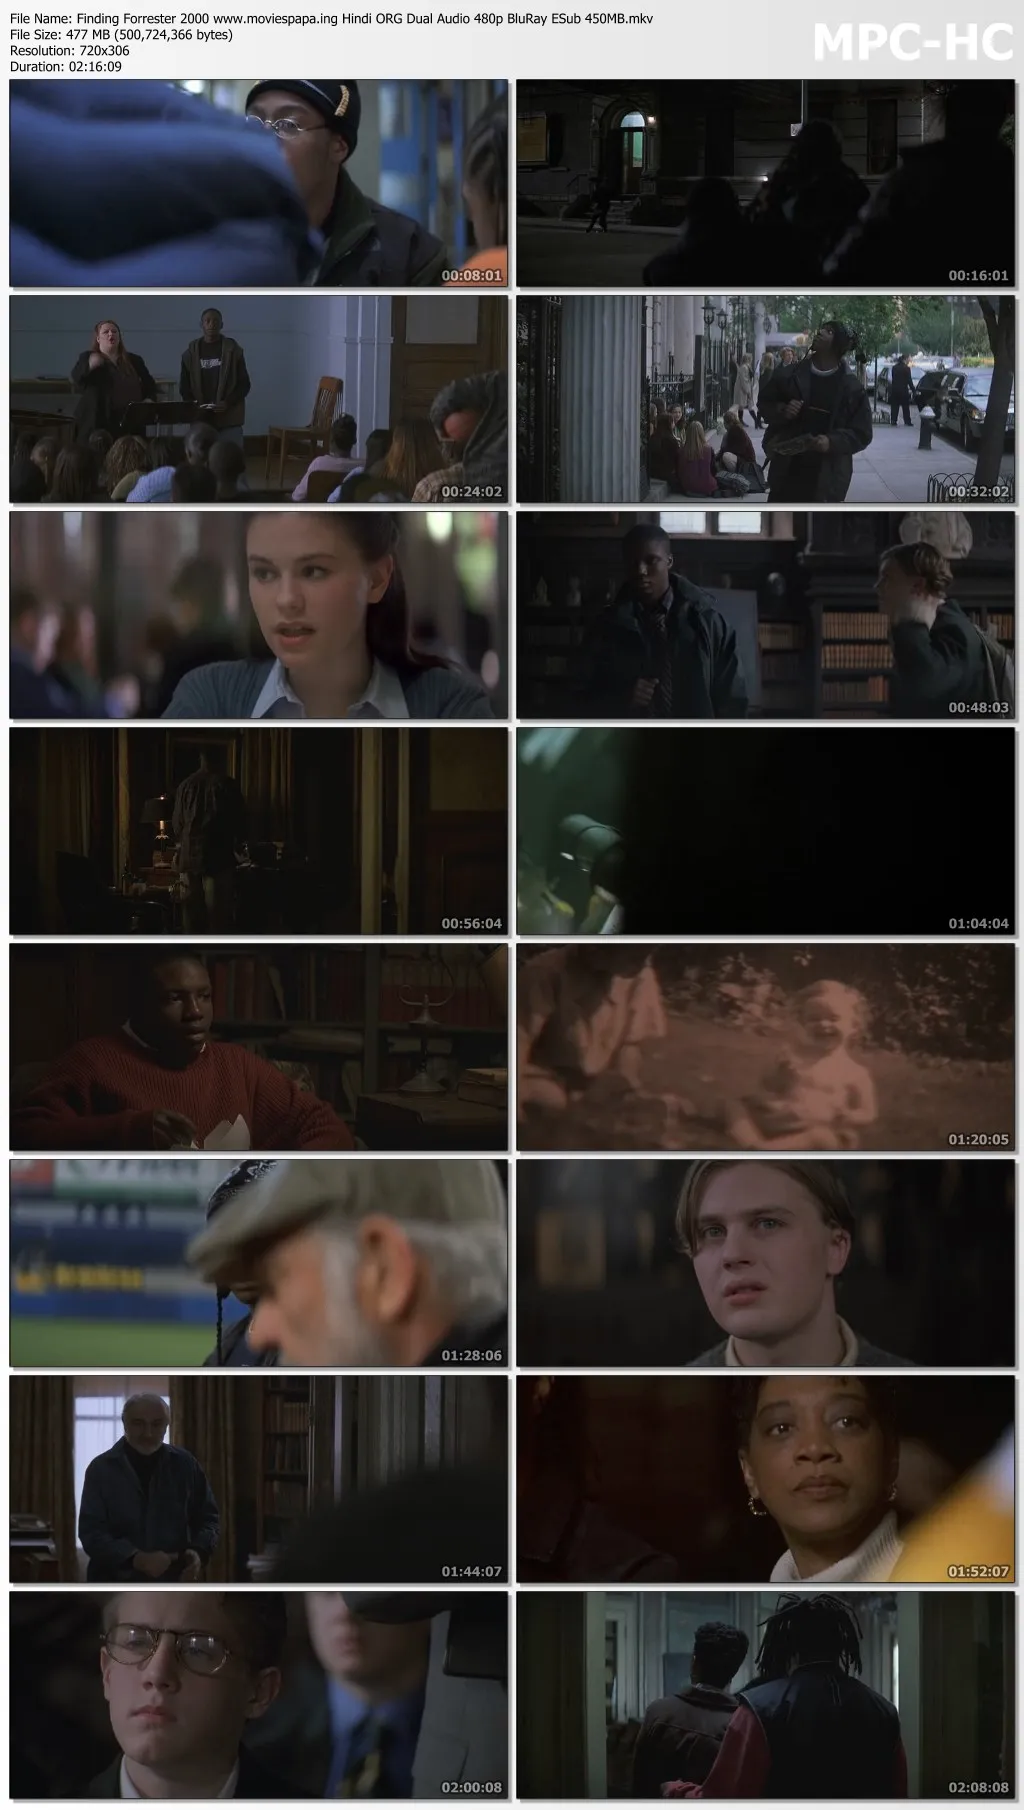 Finding Forrester 2000 Hindi ORG Dual Audio 720p BluRay ESub 1.3GB Download